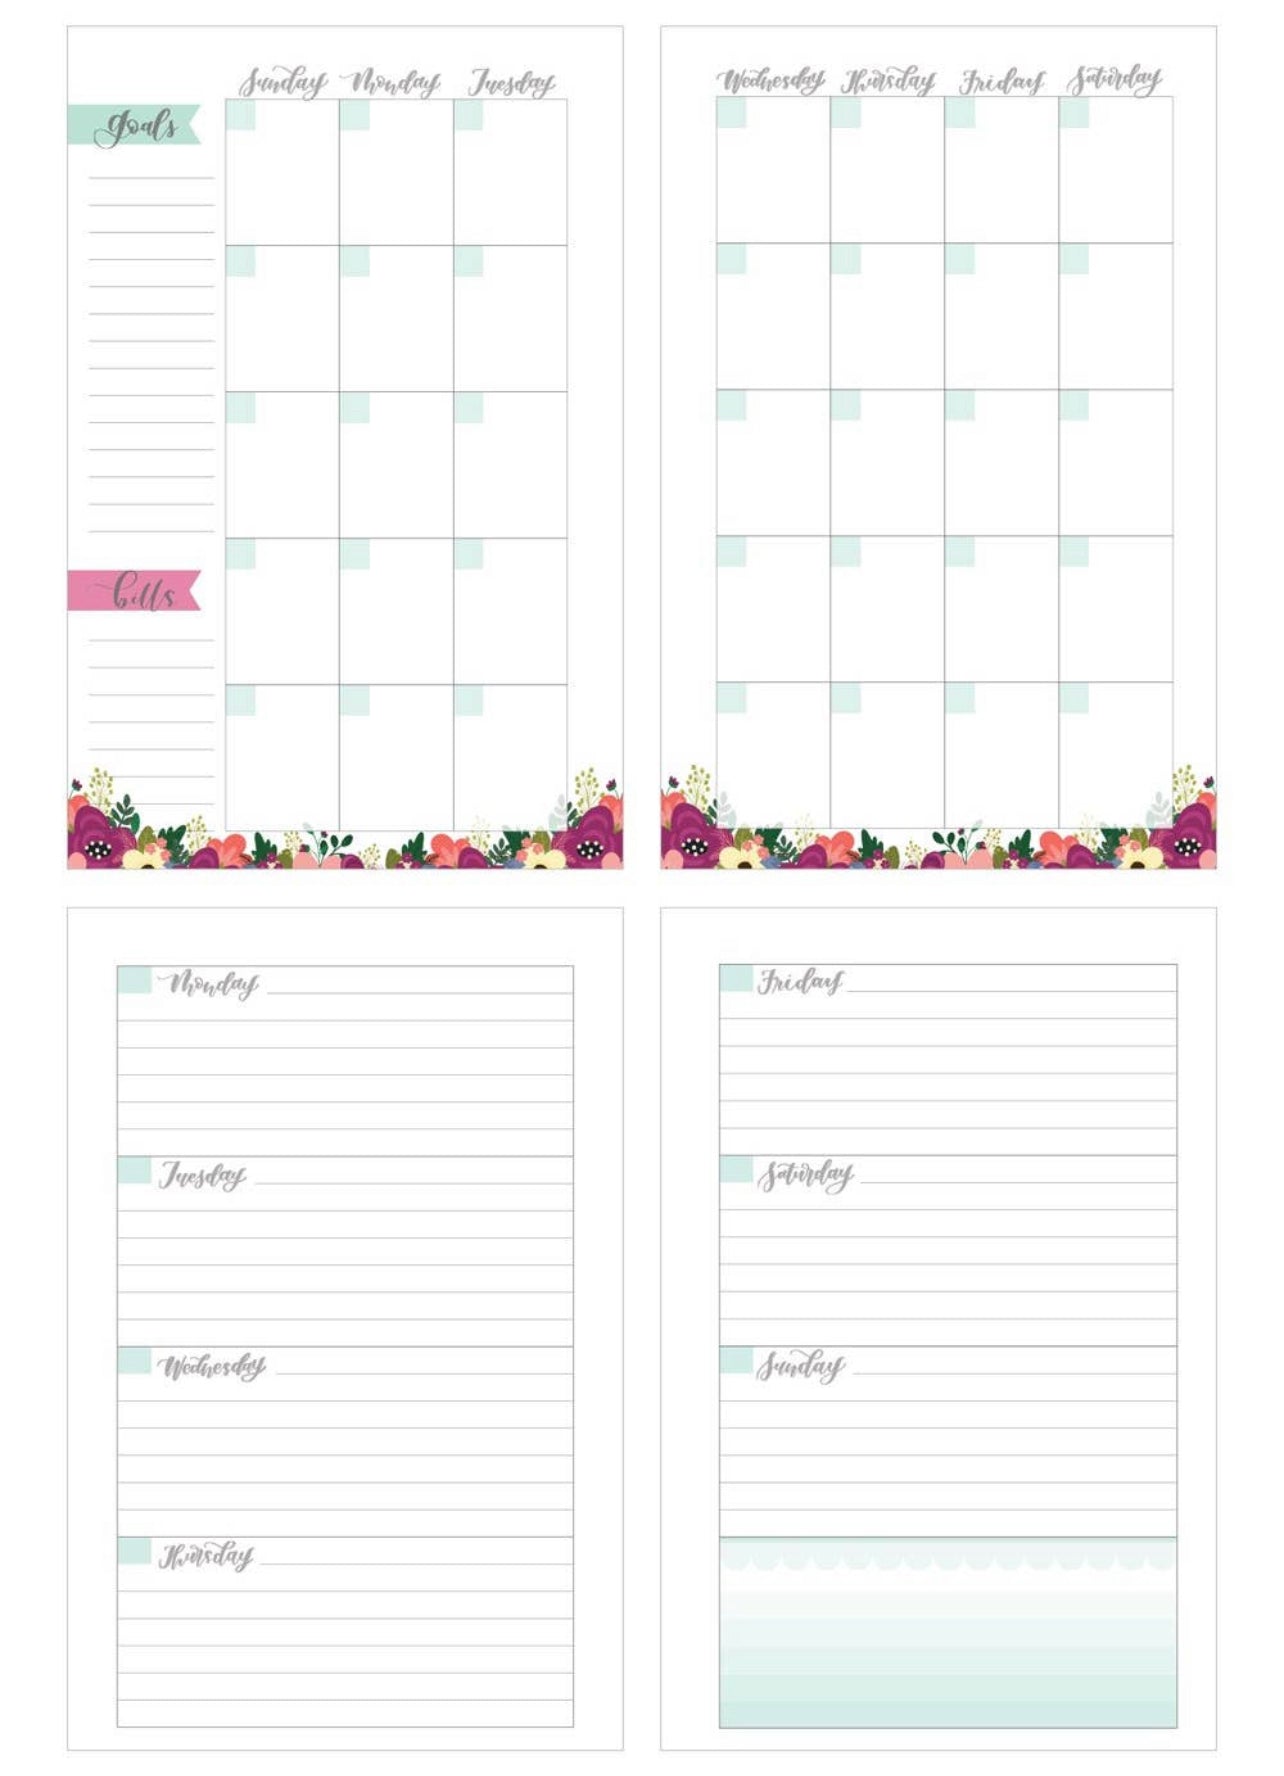 A Dream Starts with A Plan Planner Set